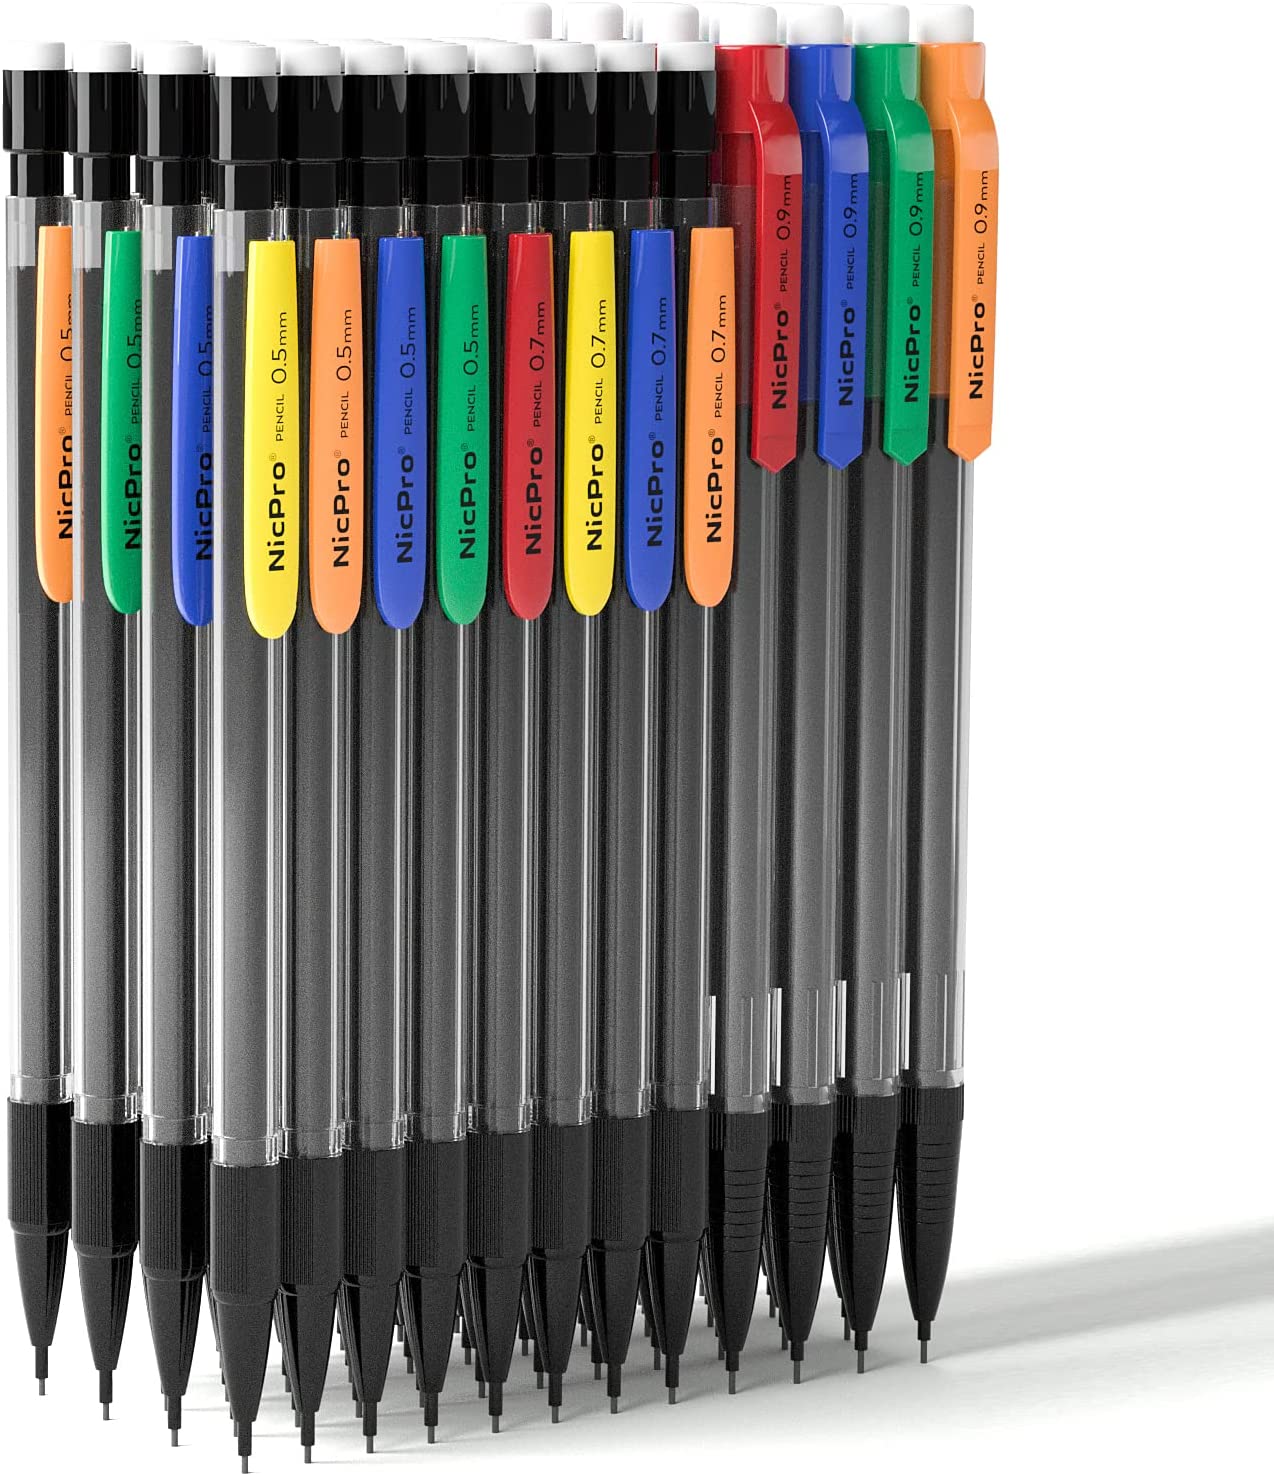 Nicpro 60 PCS Art Mechanical Pencils Set, Color Pencil Clips Drafting Pencil 0.5 mm & 0.7 mm & 0.9 mm with 6 Tube HB Lead Refills, 30 Eraser Refills for Kid Student Writing, Drawing, Sketching, School